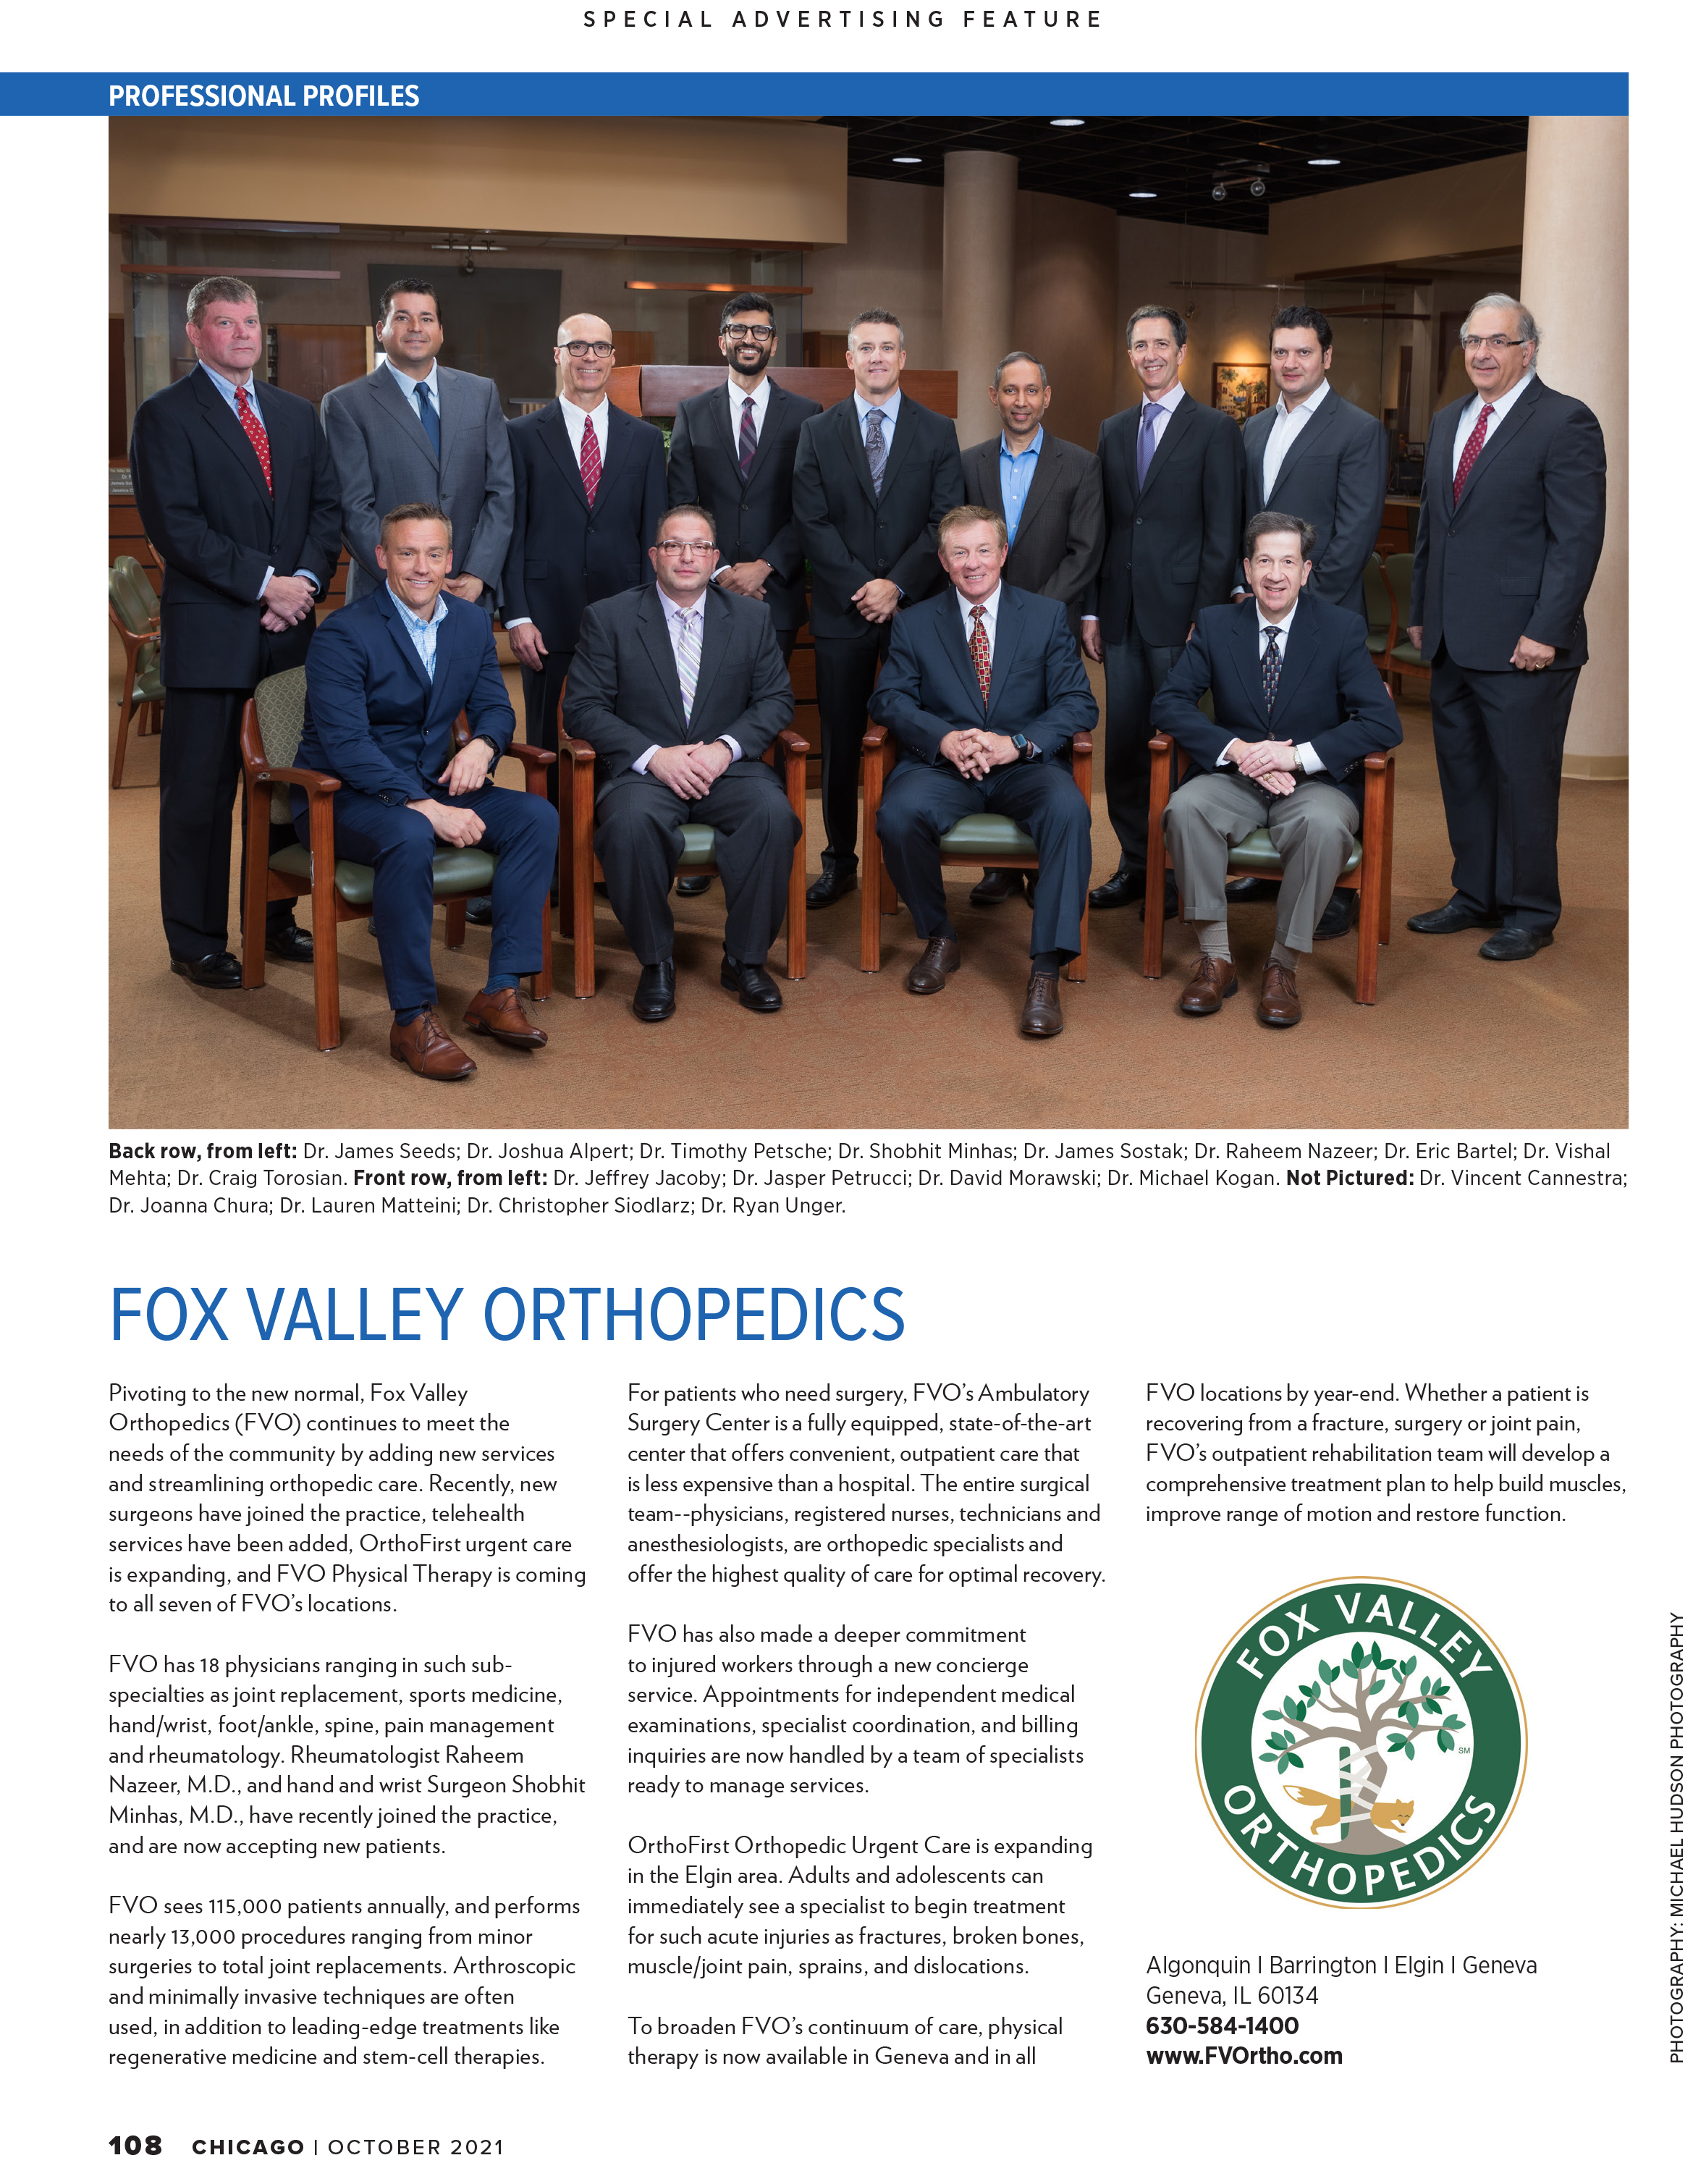 Fox Valley Orthopedics Doctors Featured in Article